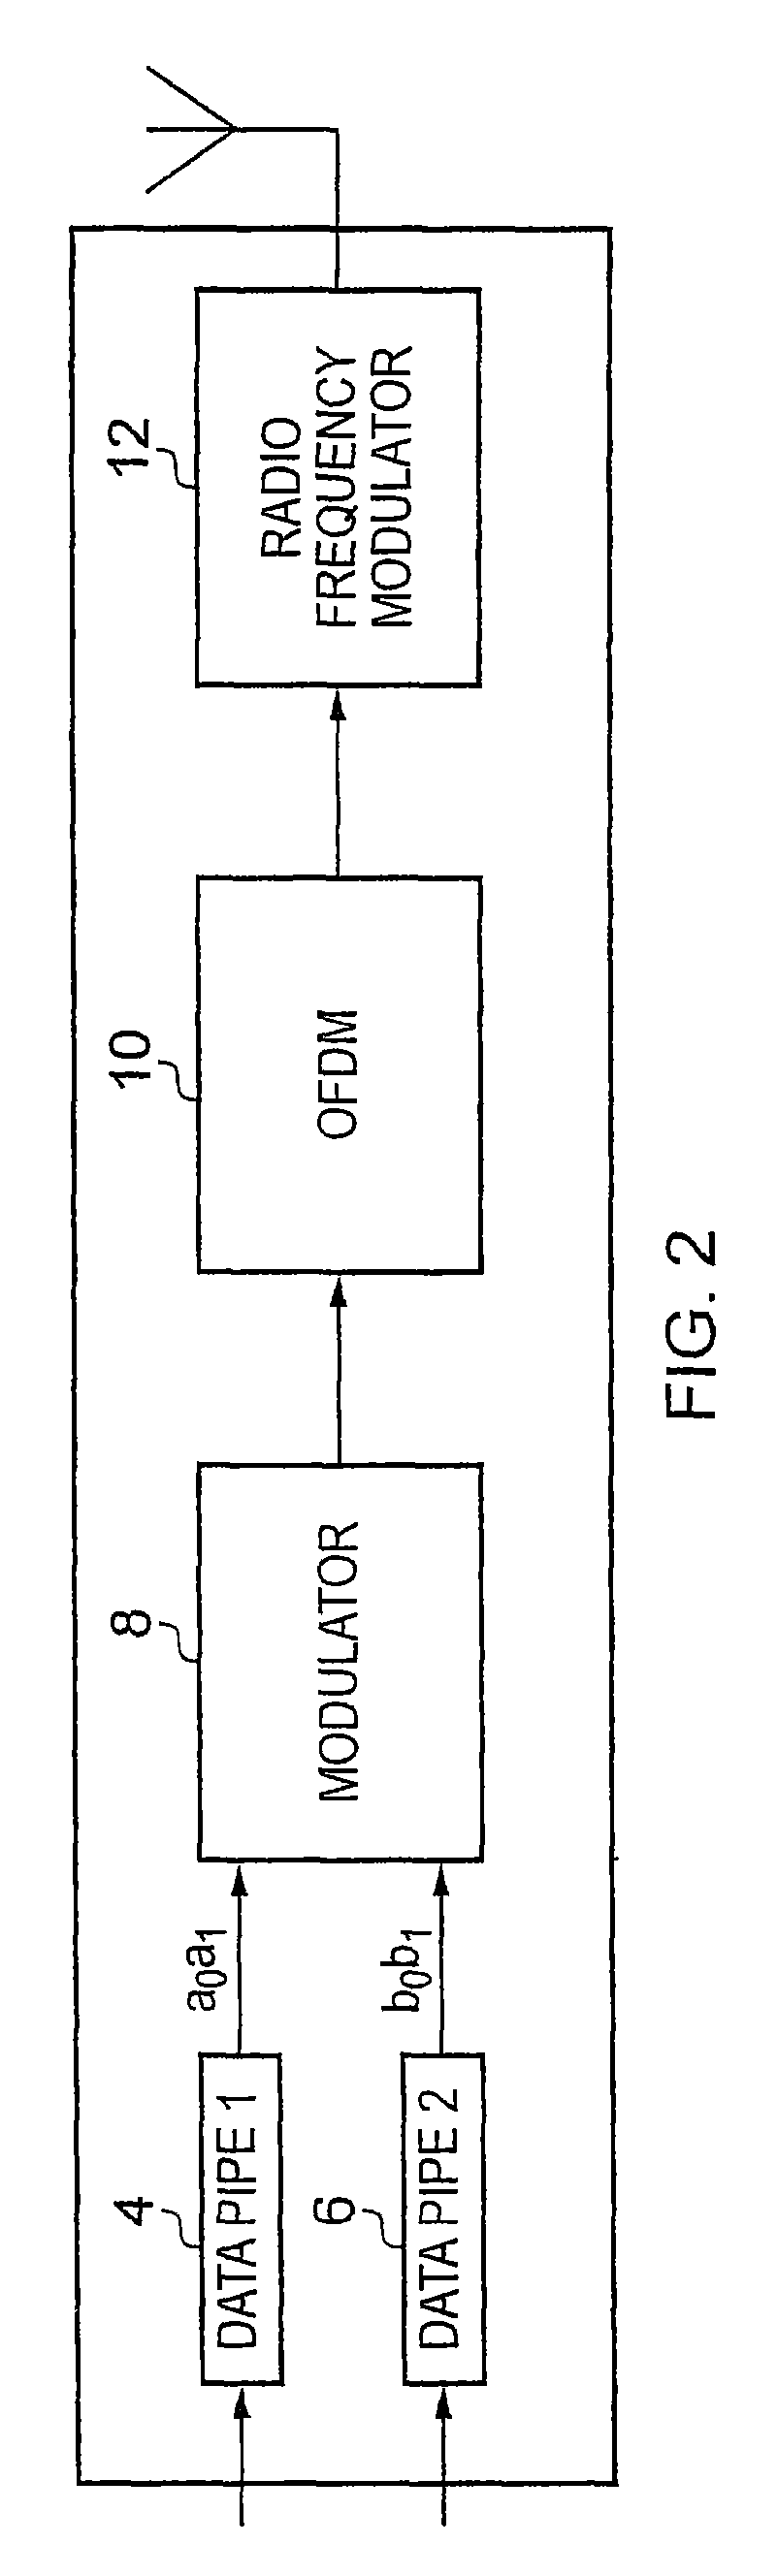 Transmitter and transmitting method for transmitting data via OFDM symbols in which the data is provided from a plurality of different data pipes